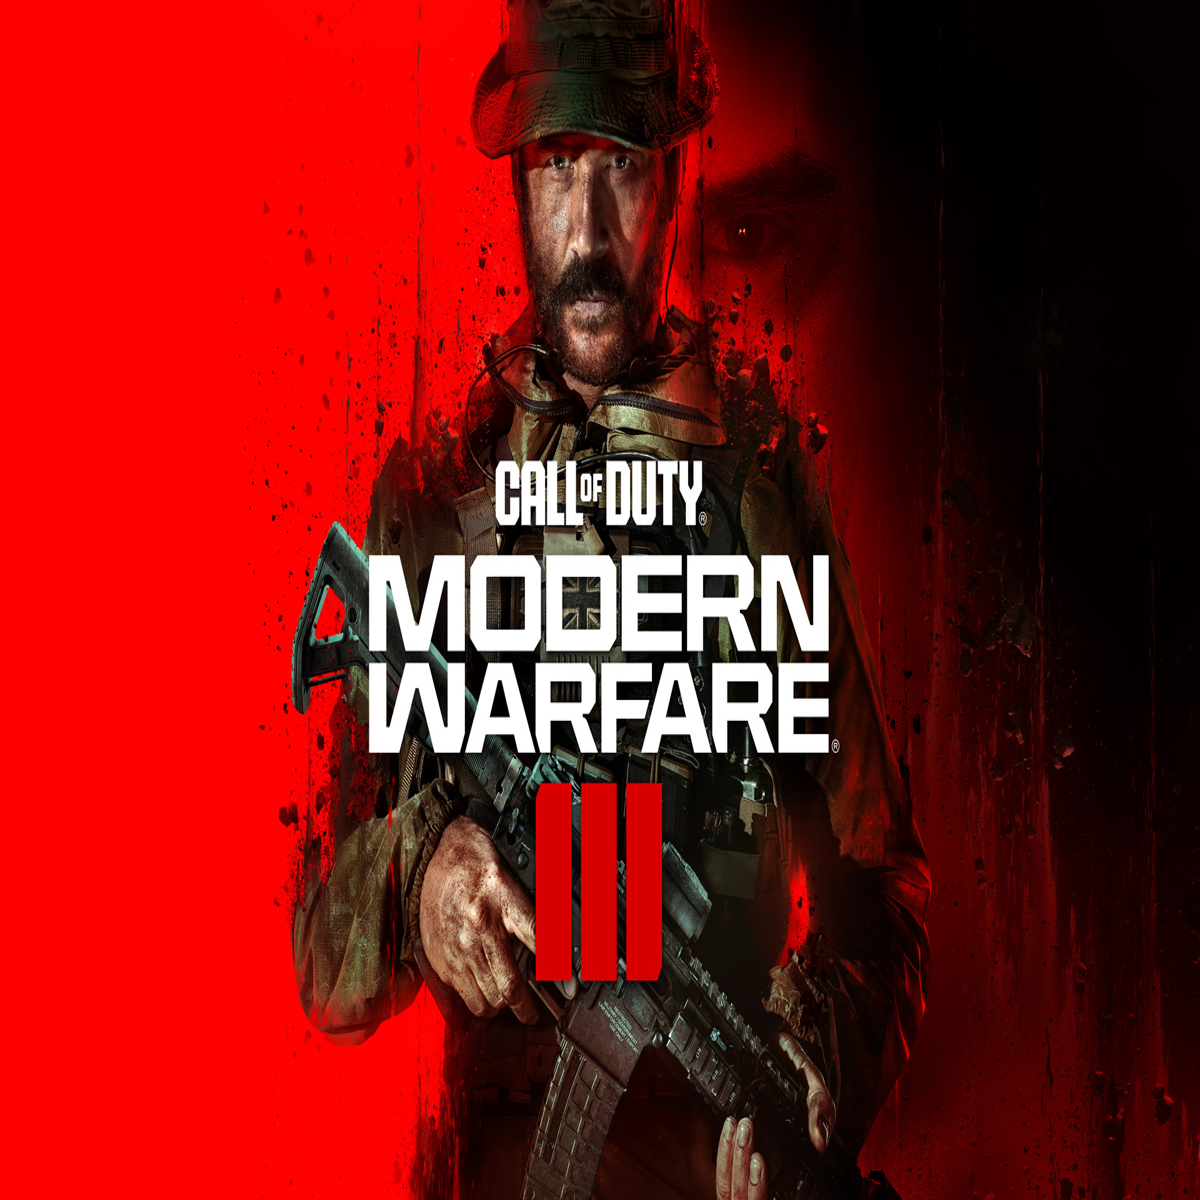 Call of Duty: Modern Warfare II PS4: Call of Duty: Modern Warfare II  Multiplayer goes free this week on PC, PS4, PS5, Xbox One, Xbox Series S/X  - The Economic Times